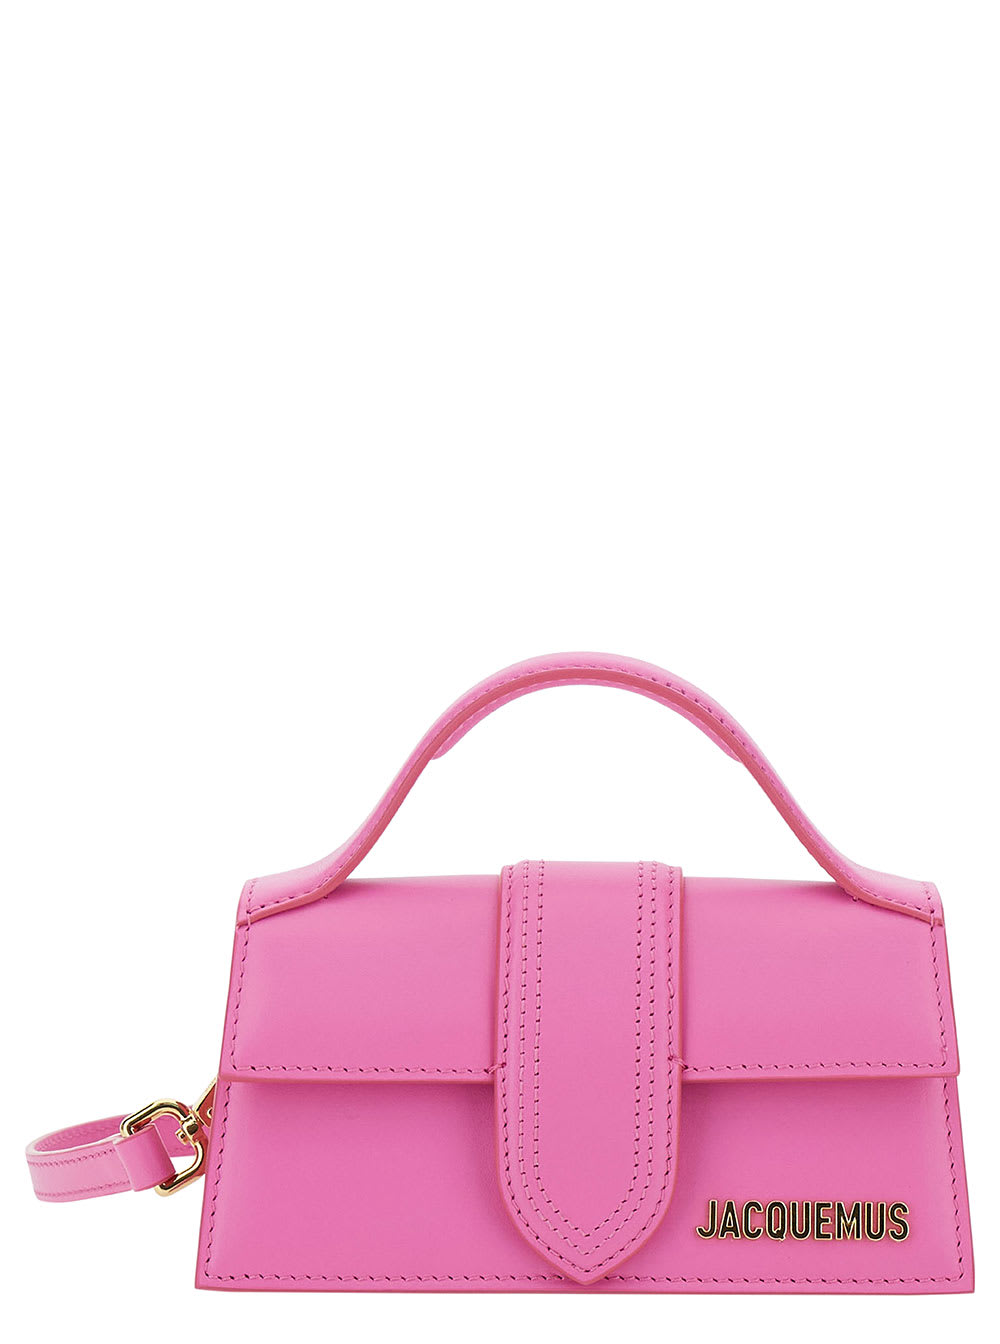 Jacquemus Le Bambino Pink Handbag With Removable Shoulder Strap In Leather Woman